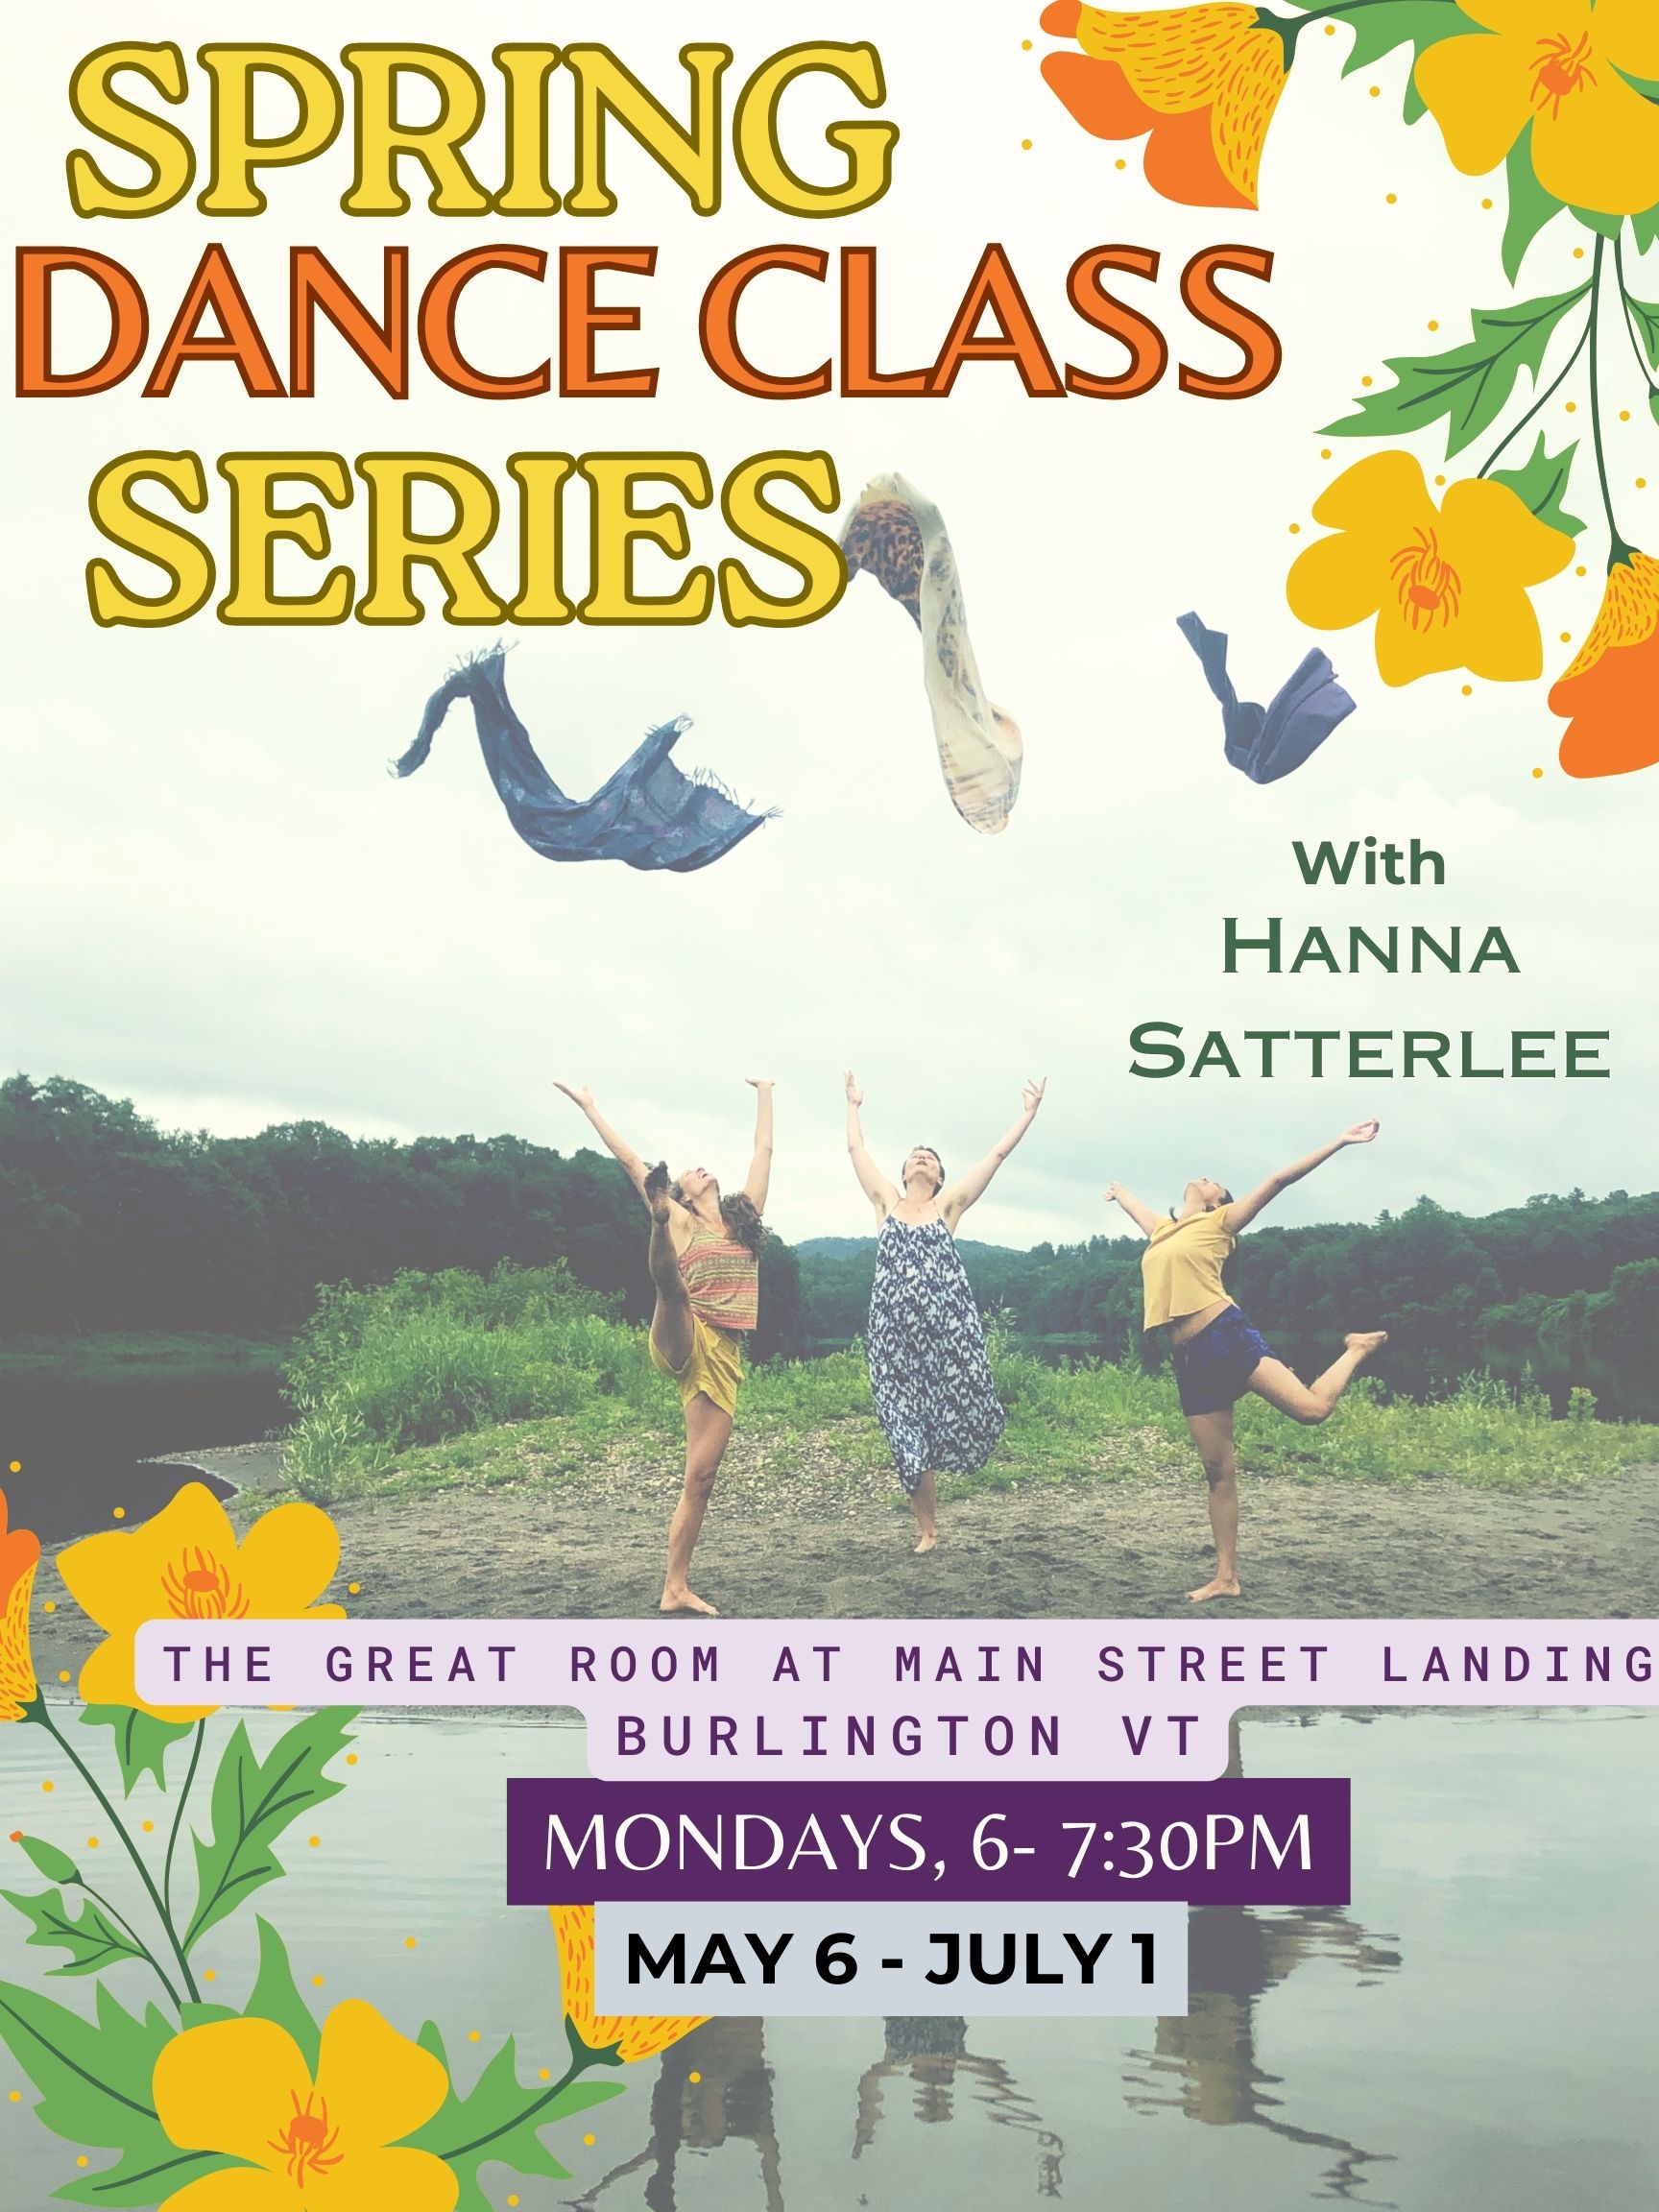 spring dance class poster with yellow and orange flowers at corners. 3 dancers in center throwing cloth up in the air and dancing.